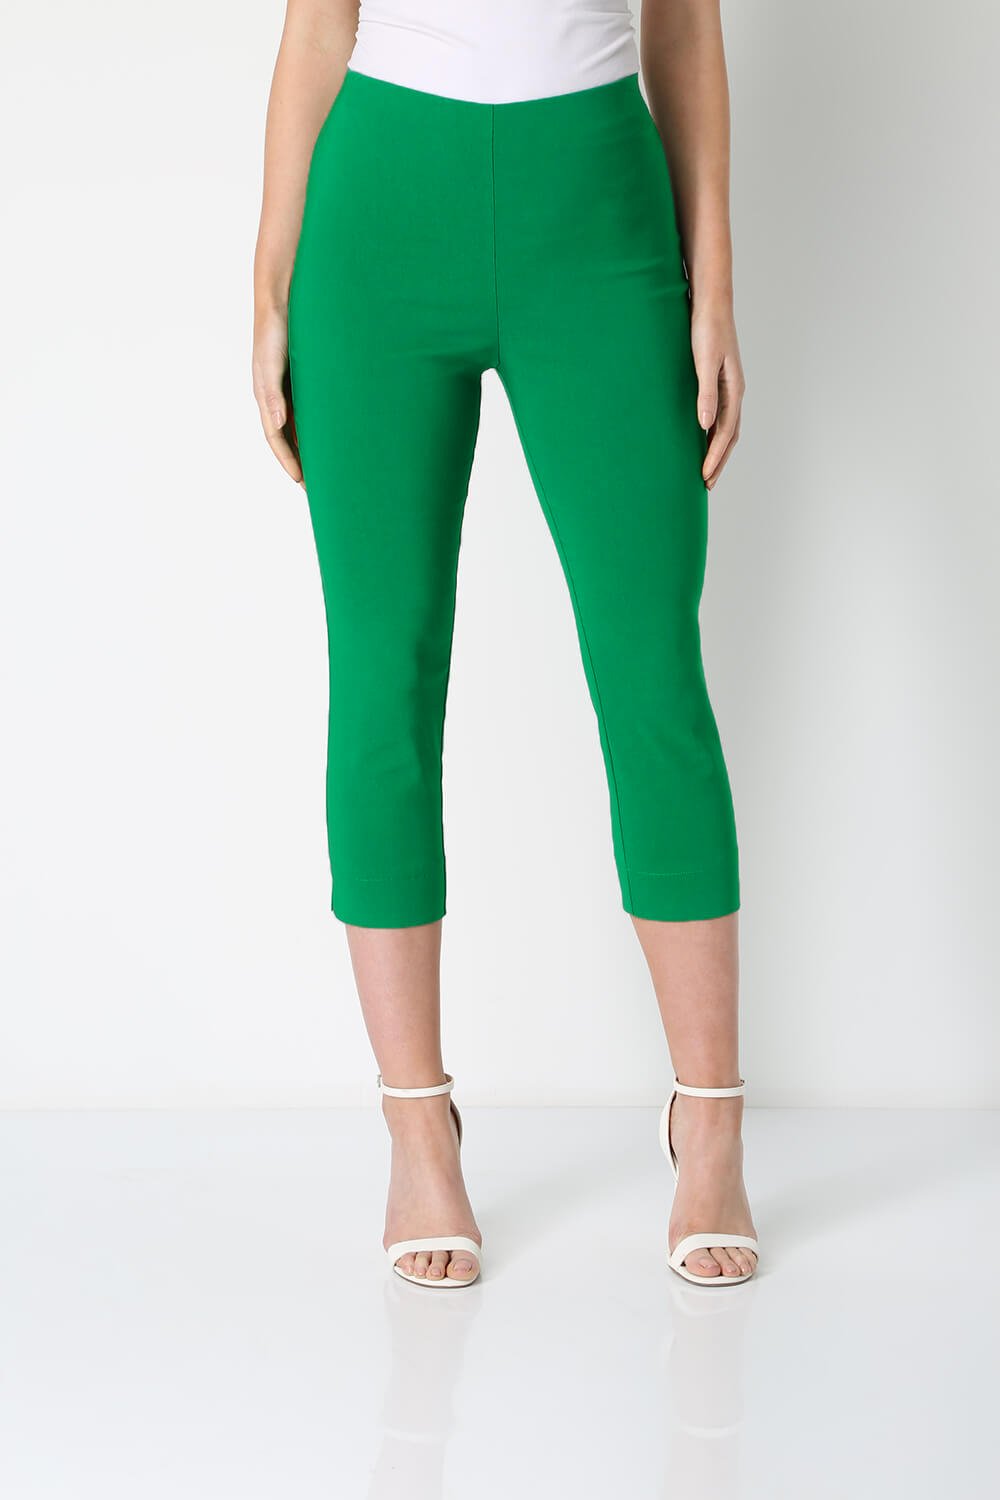 Emerald Green Cropped Stretch Trouser, Image 1 of 5